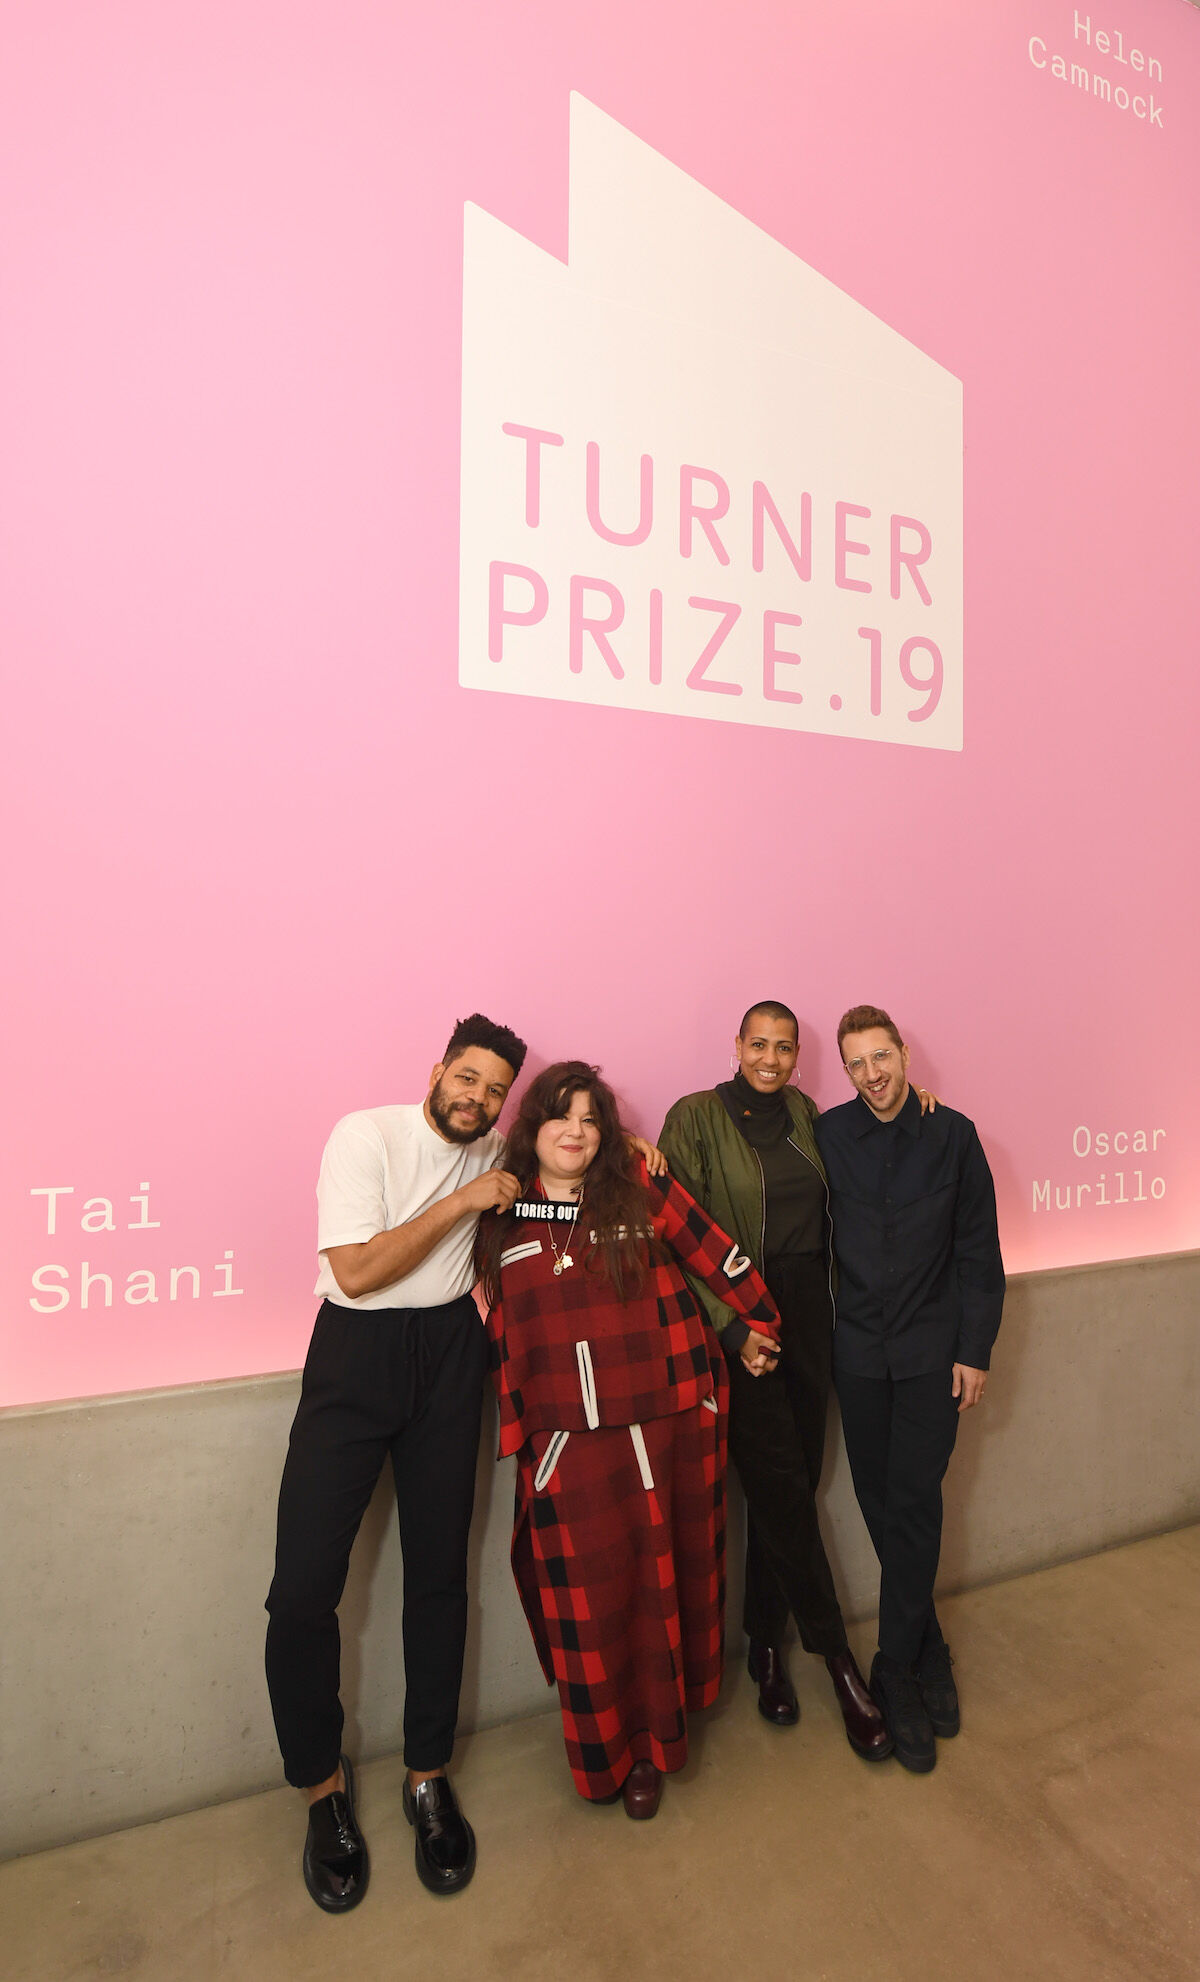 The four nominated artists for the 2019 Turner Prize at the awards ceremony. From left to right: Oscar Murillo, Tai Shani, Helen Cammock, and Lawrence Abu Hamdan. Photo by Stuart Wilson/Getty.